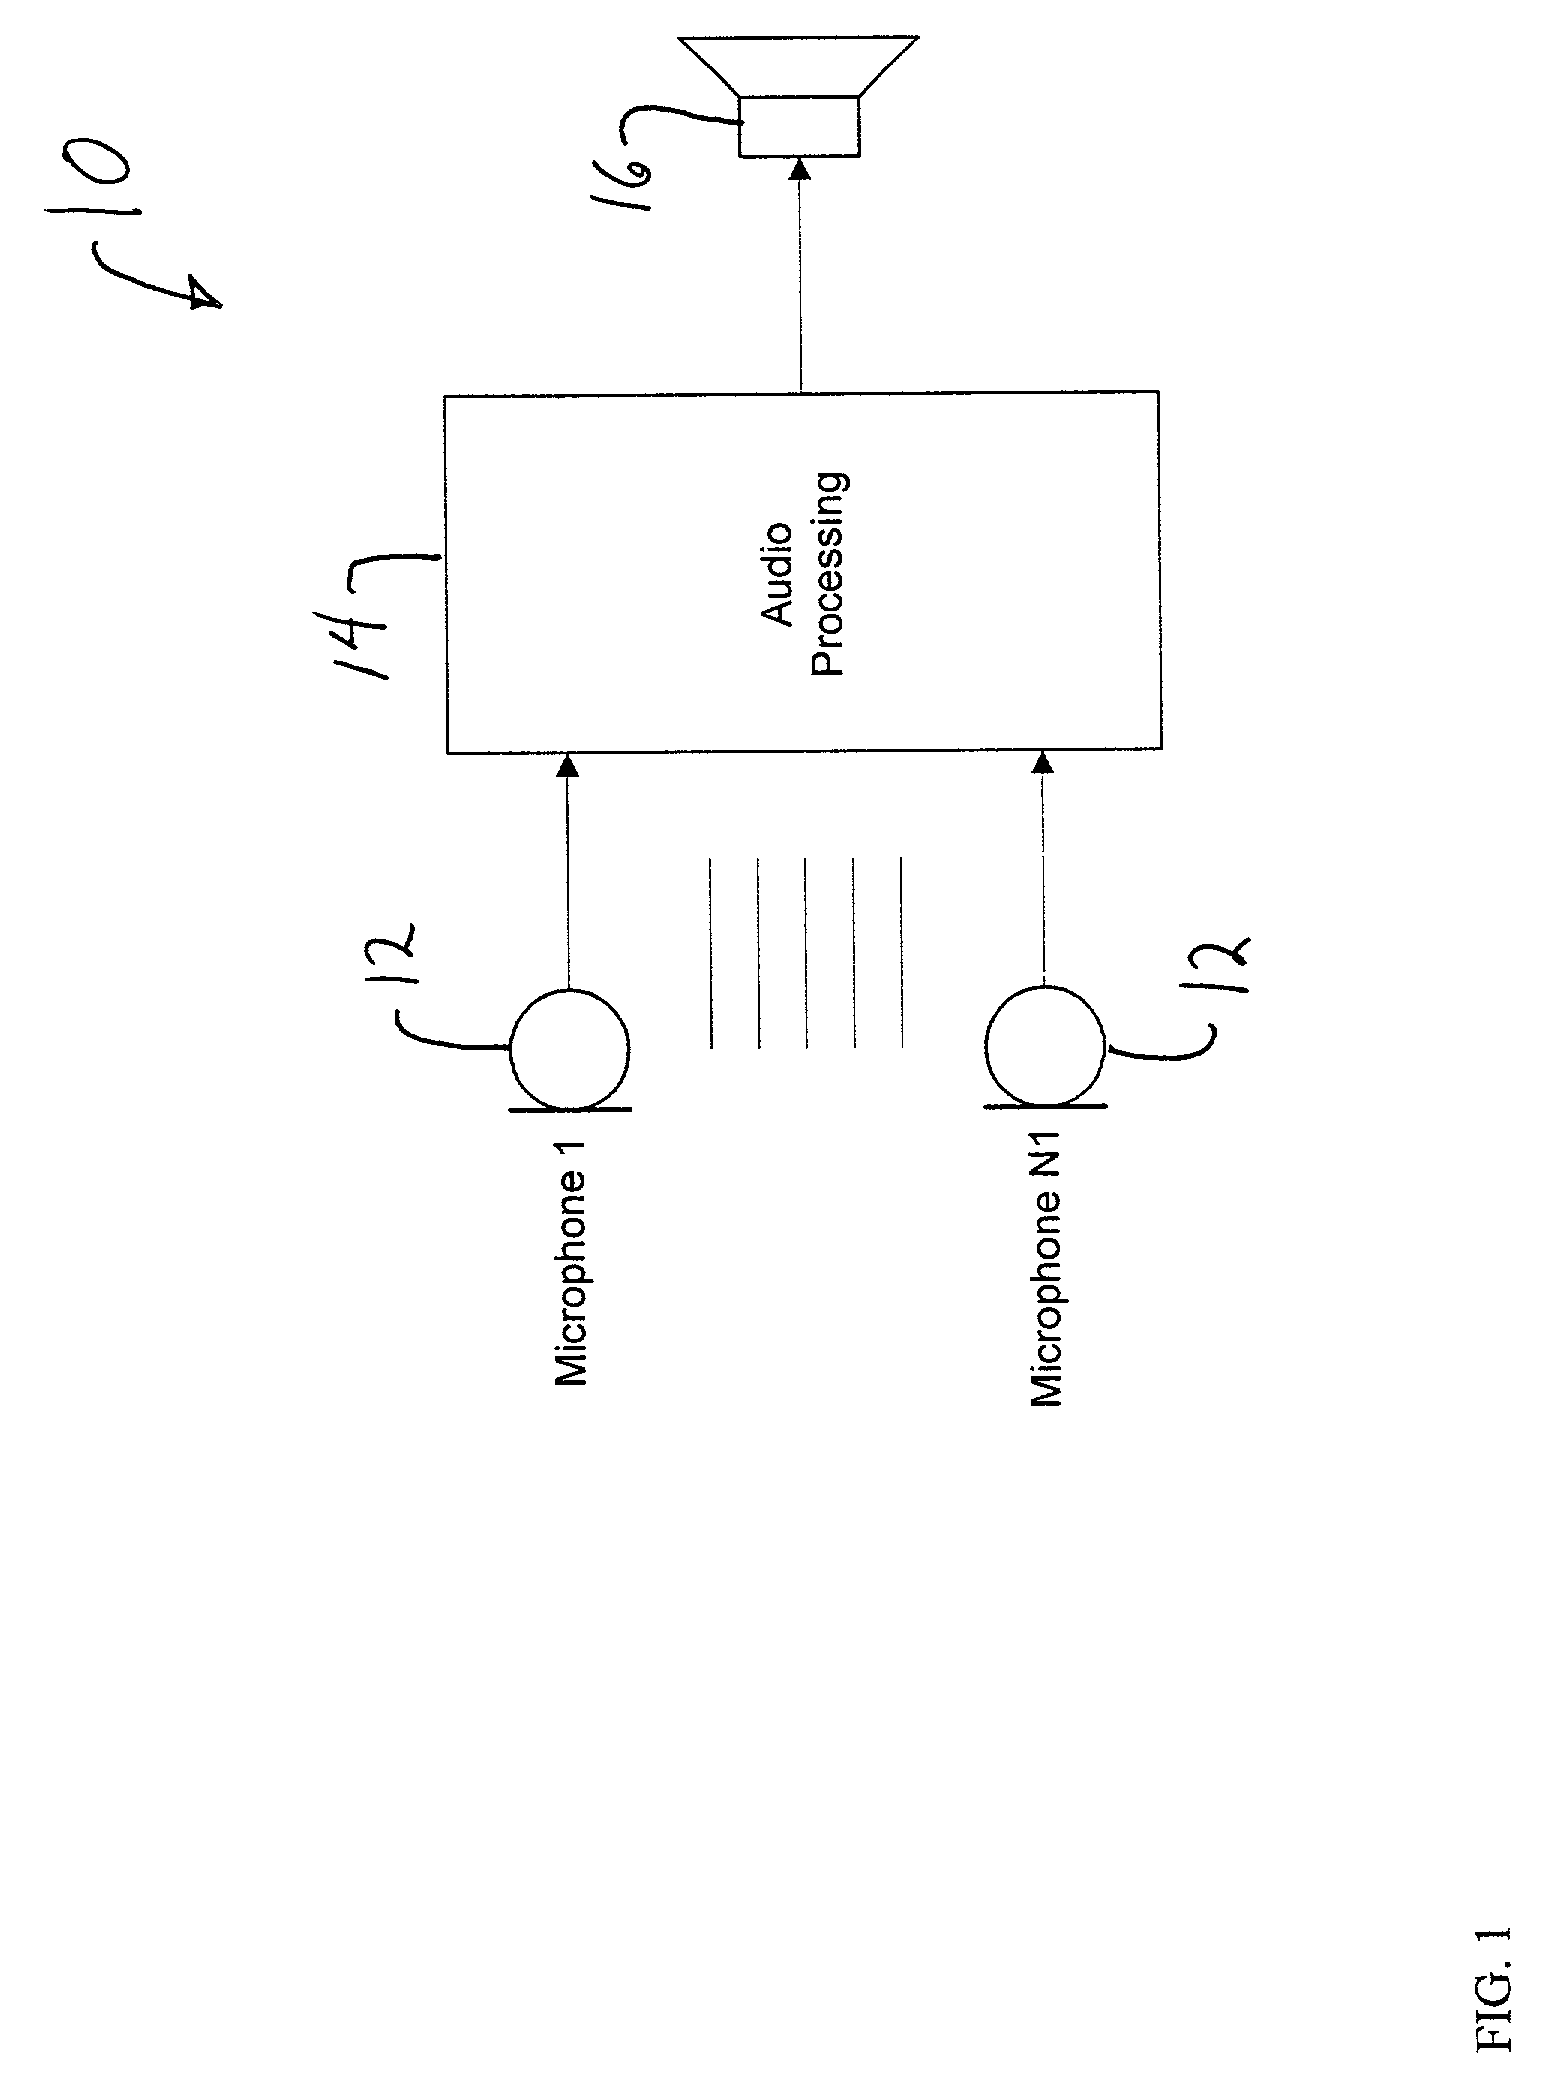 Sound processing system including forward filter that exhibits arbitrary directivity and gradient response in single wave sound environment